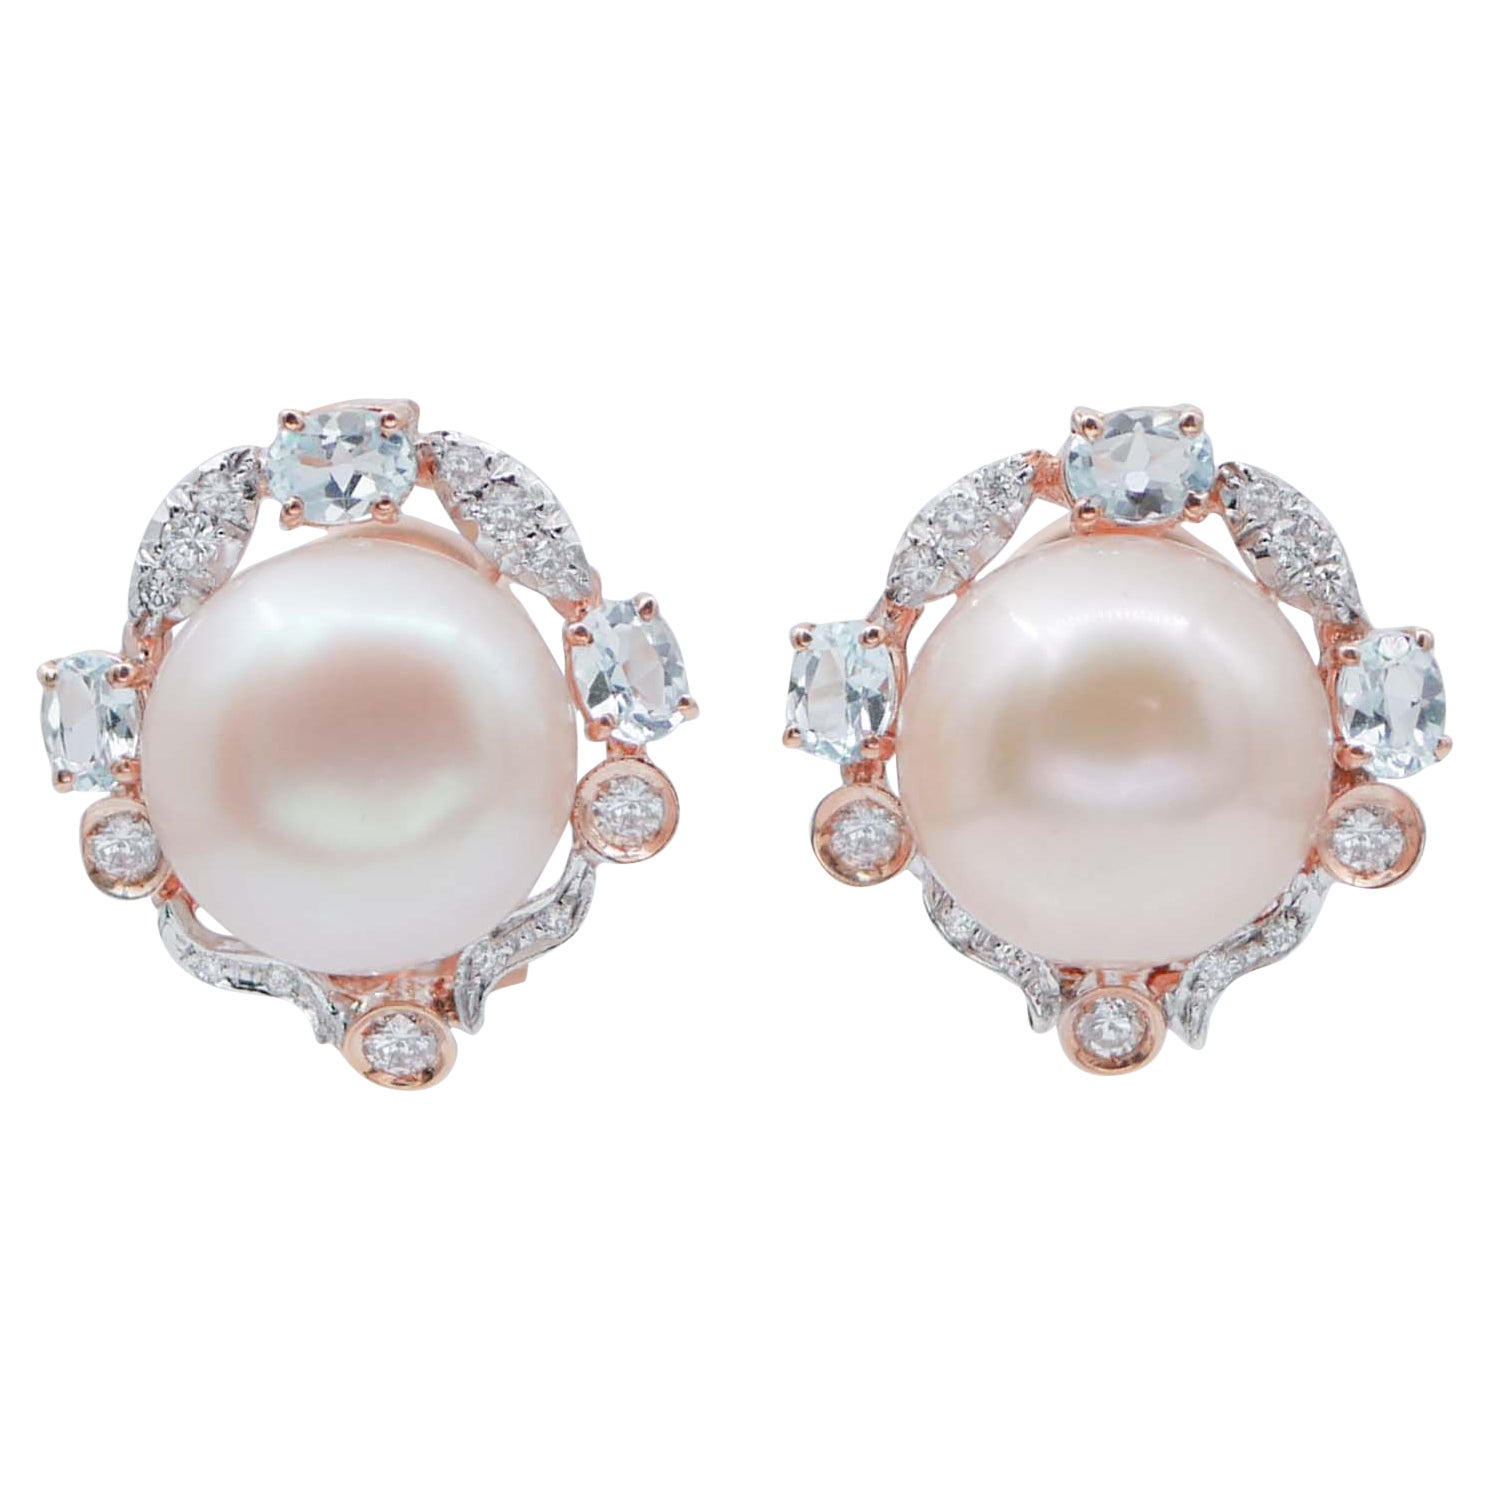 Pink Pearls, Aquamarine, Diamonds, 14 Kt Rose and White Gold Earrings.